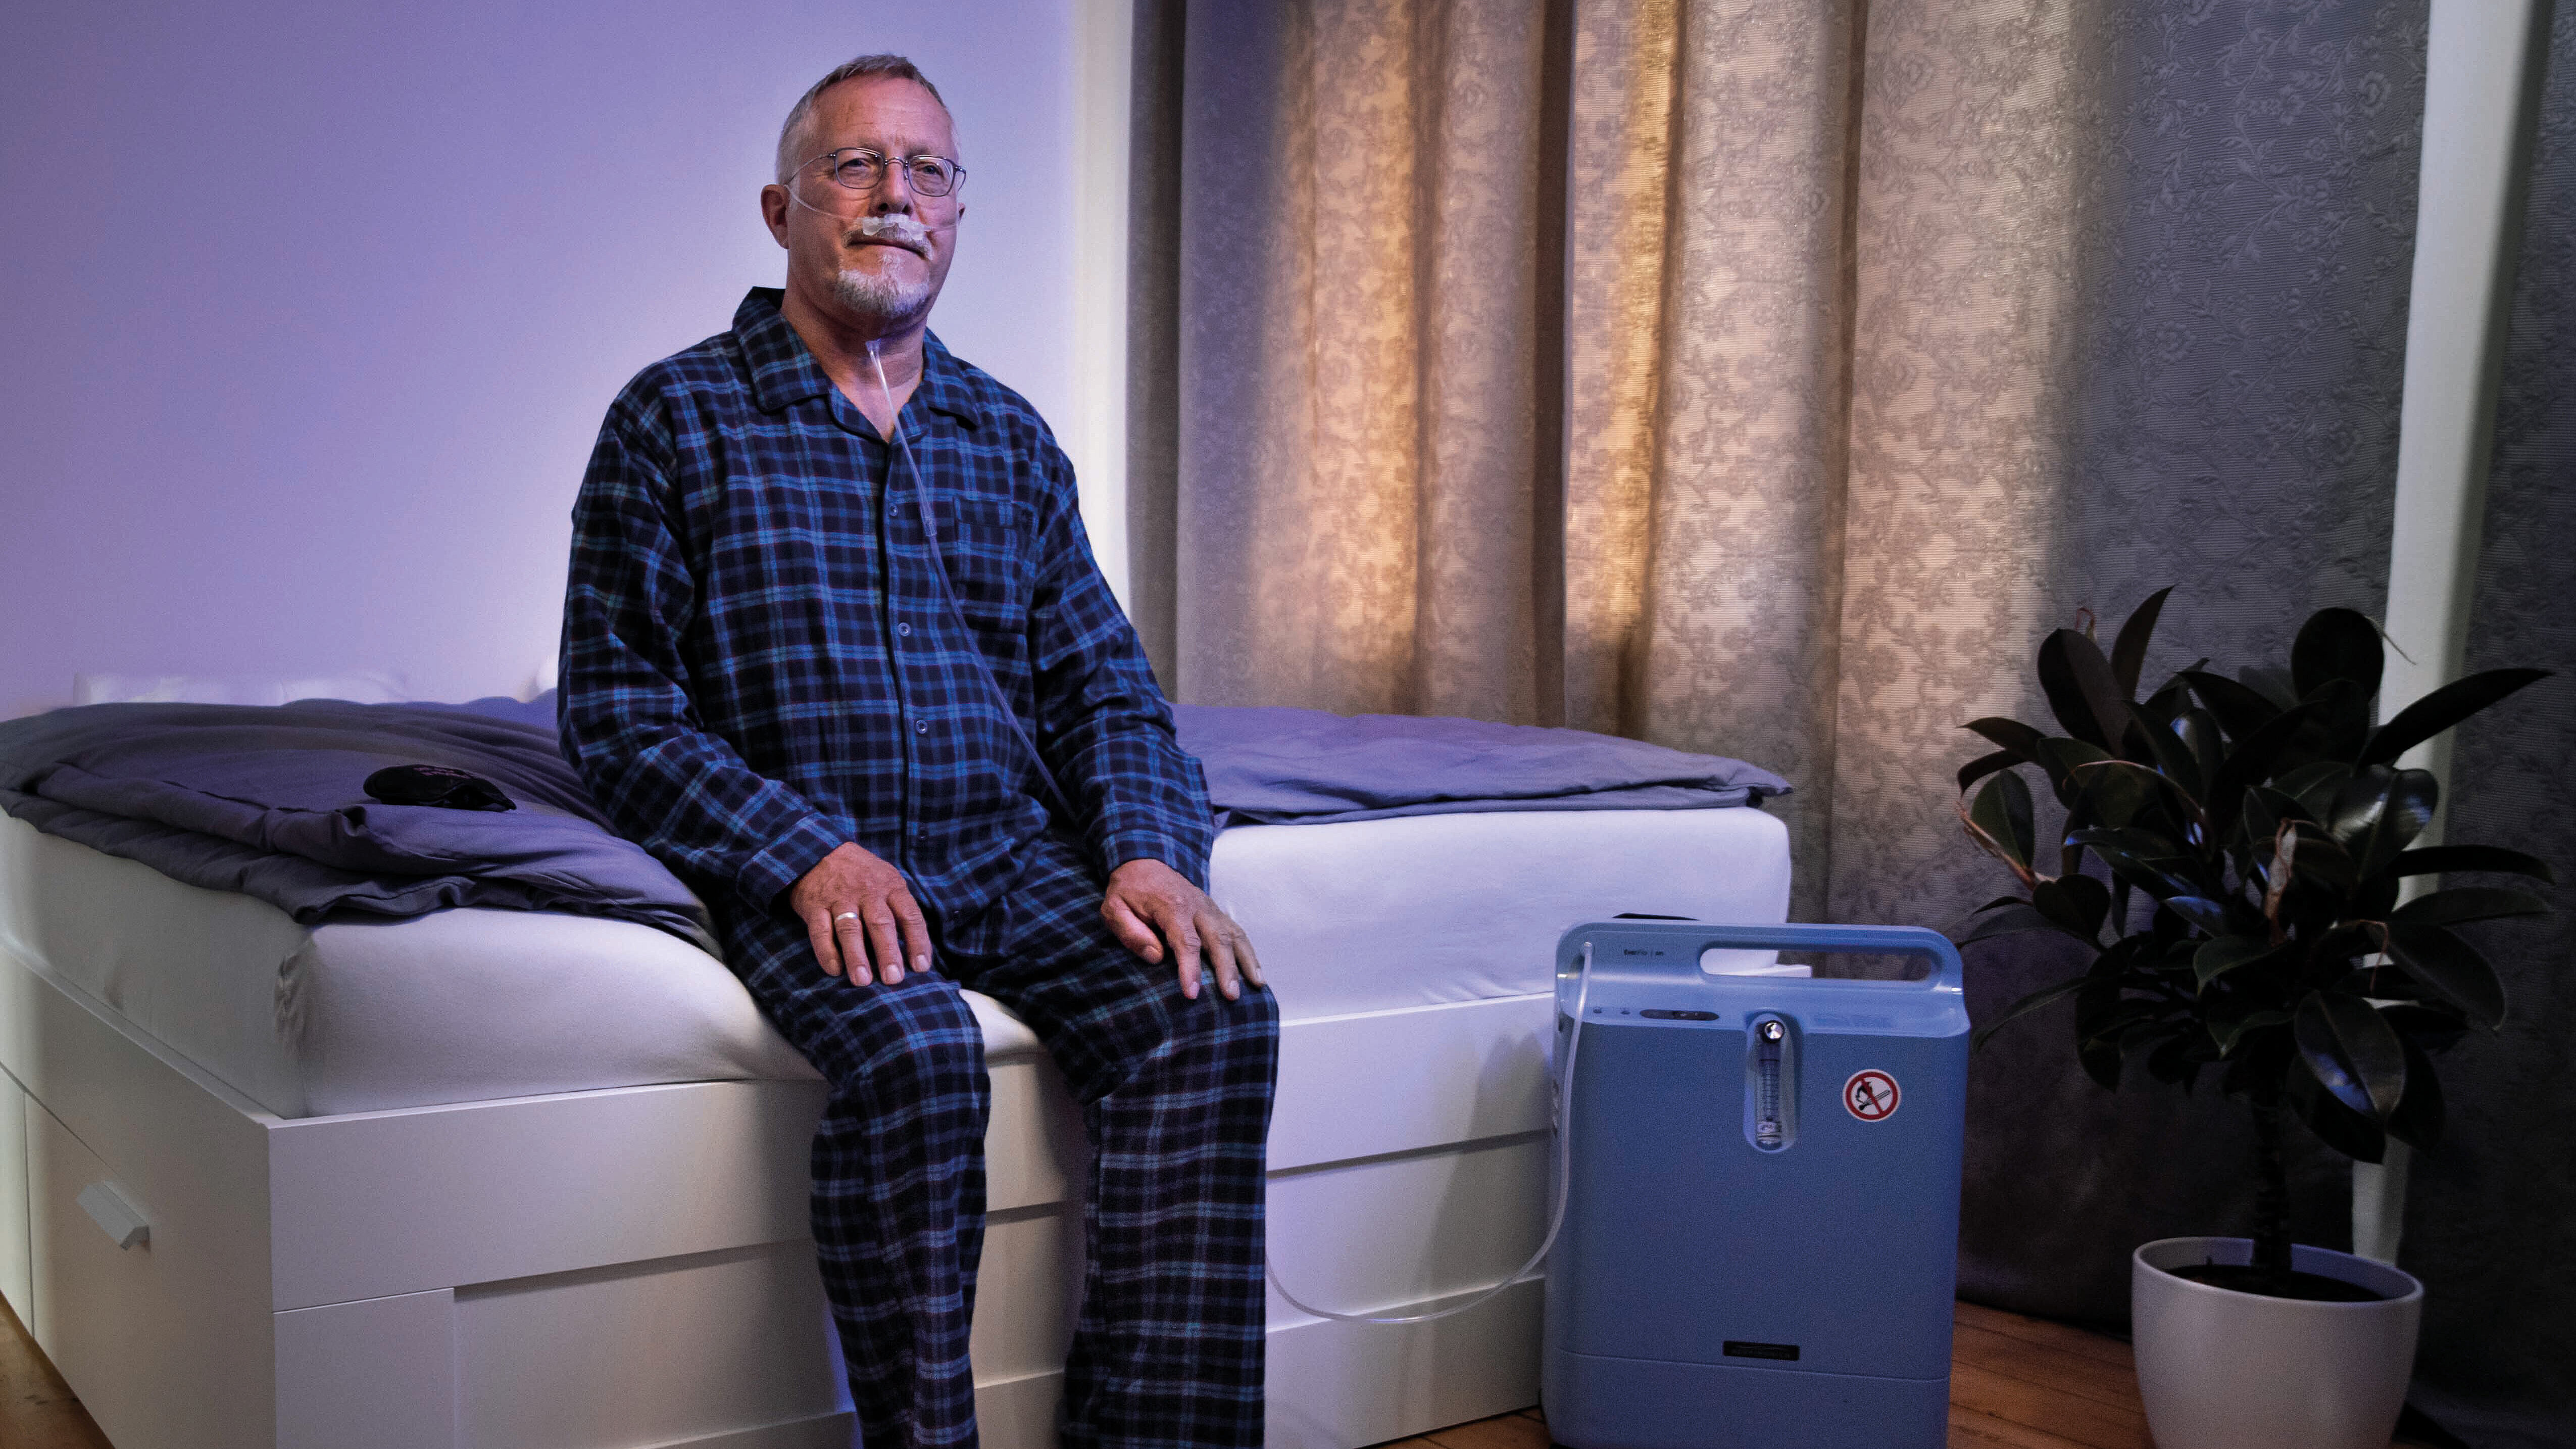 everflo oxygen concentrator patient sitting on bed